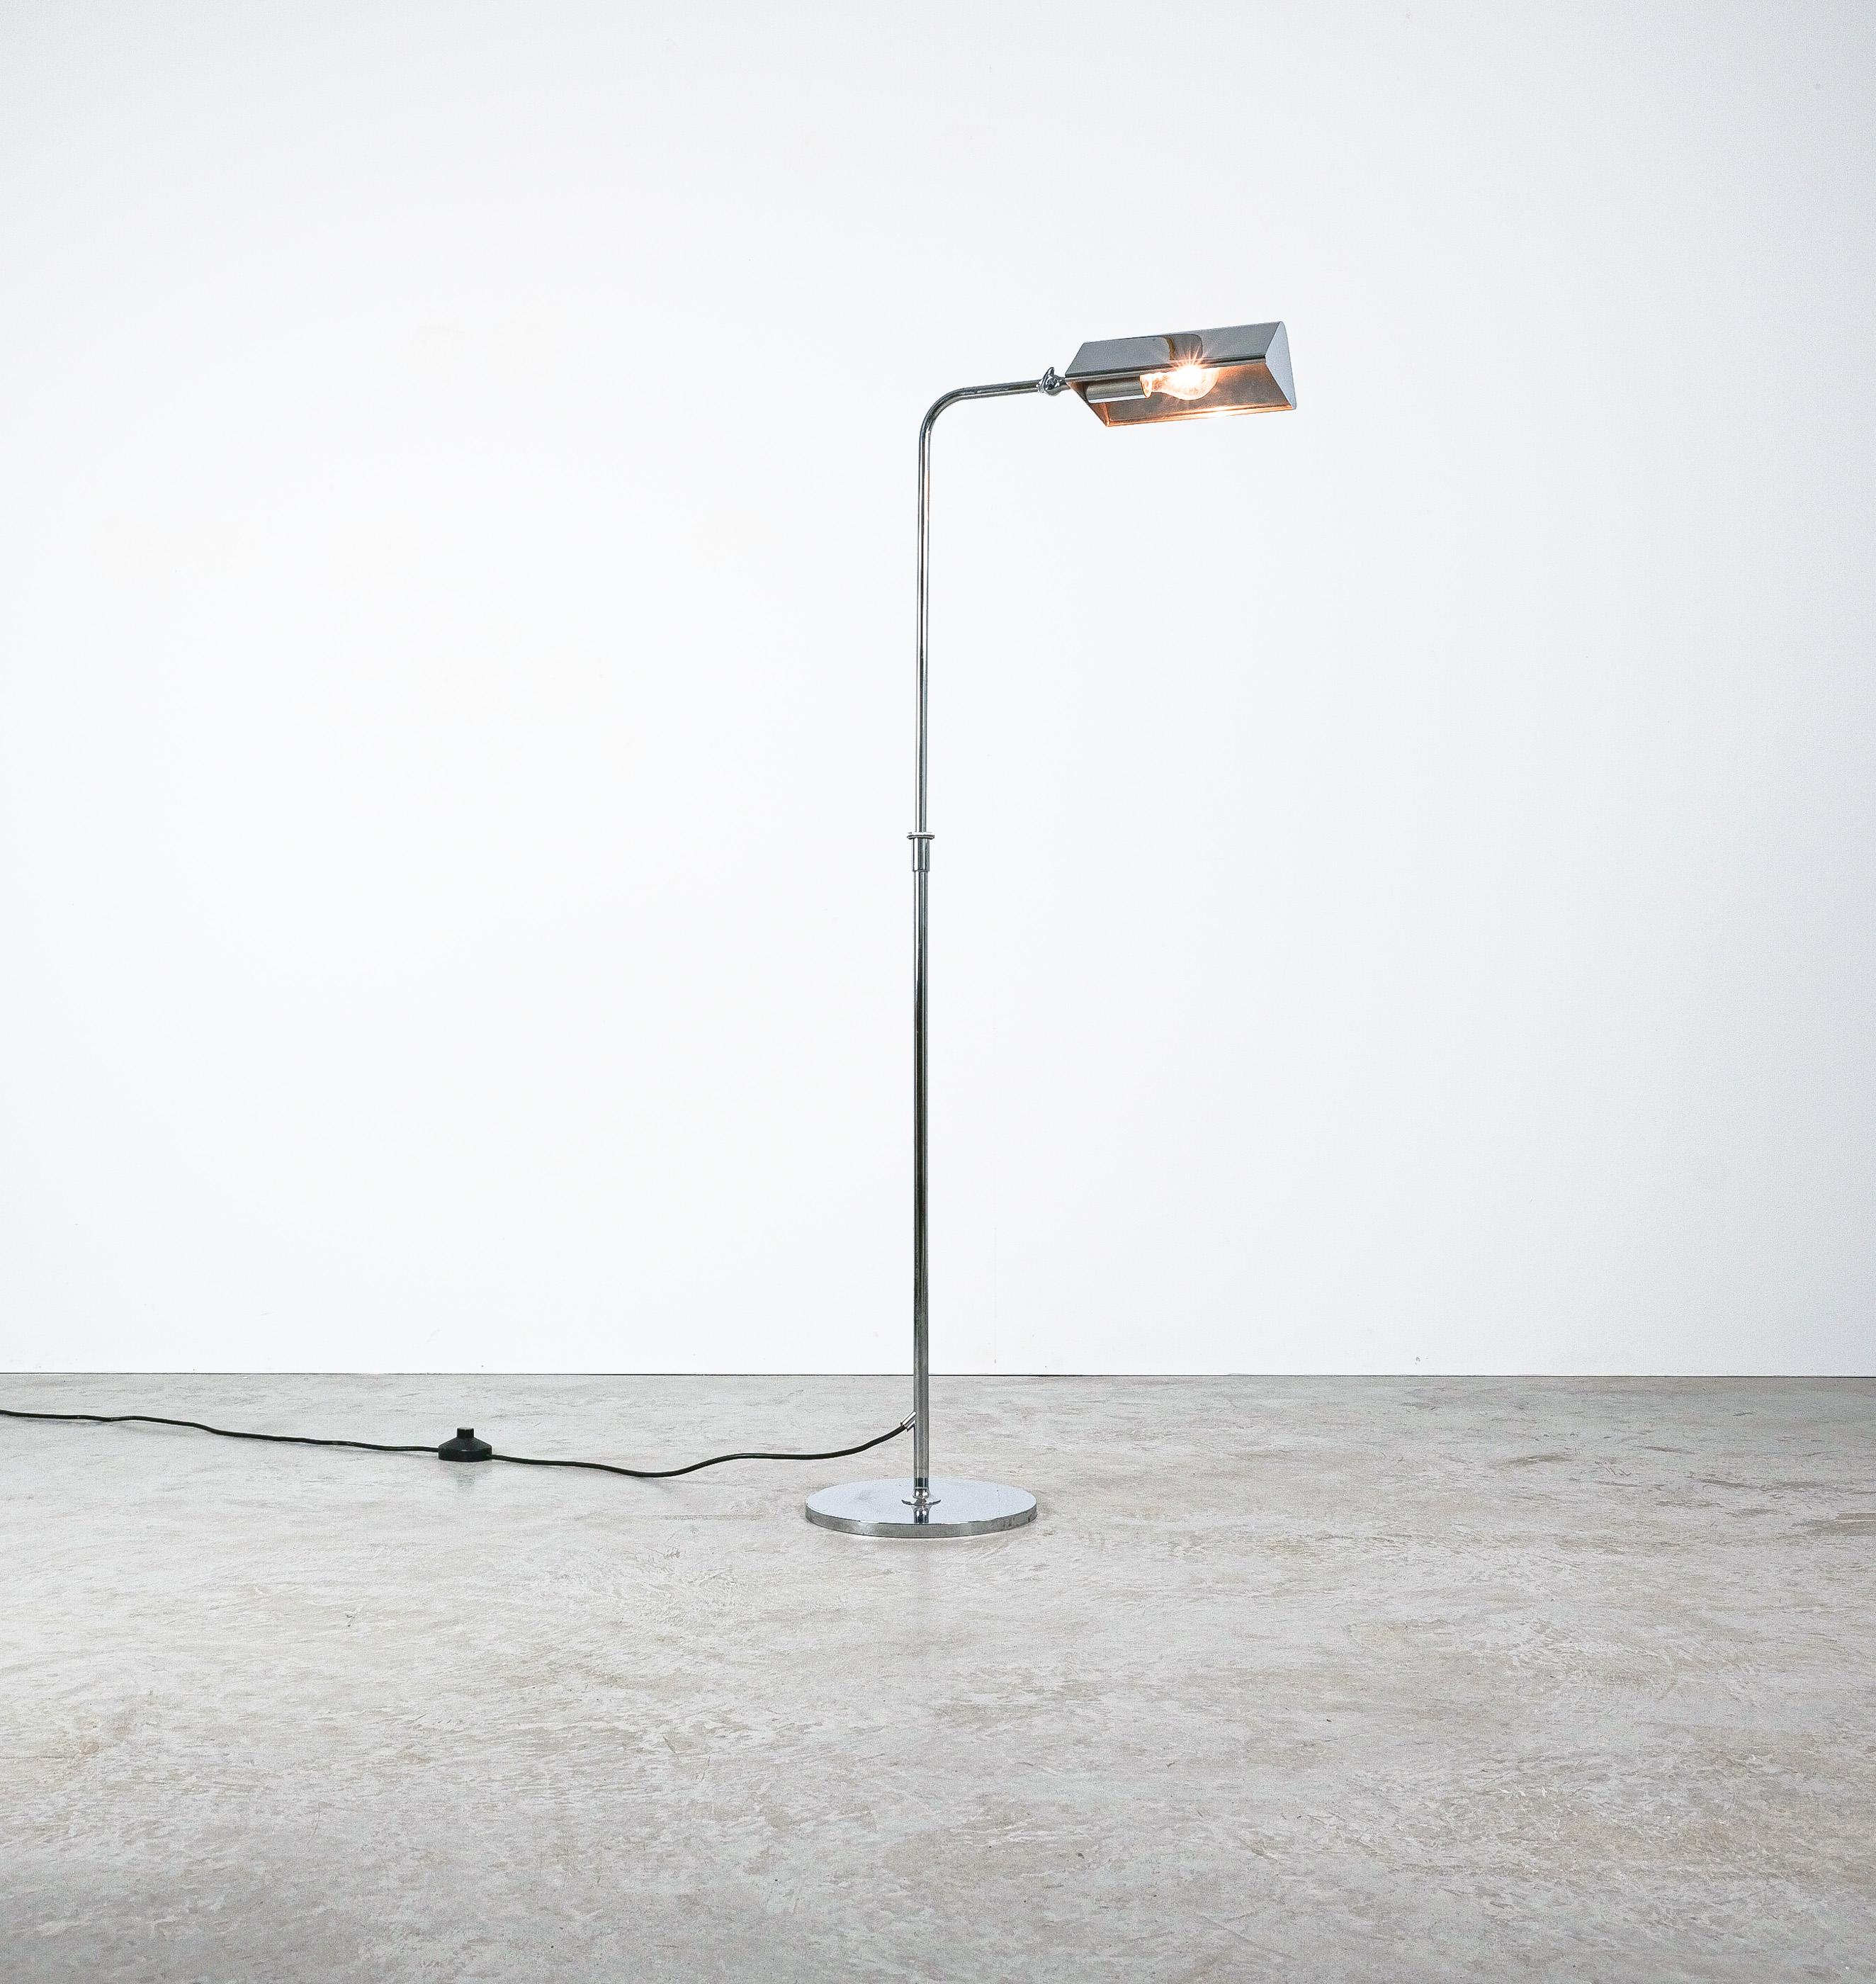 Elegant floor lamp by Florian Schulz, Germany, 1970. 
We have an identical model available with a nickel finish.

This lamp by Florian Schulz is adjustable and can be pivoted in multiple positions, it is being designed for easily being adjusted